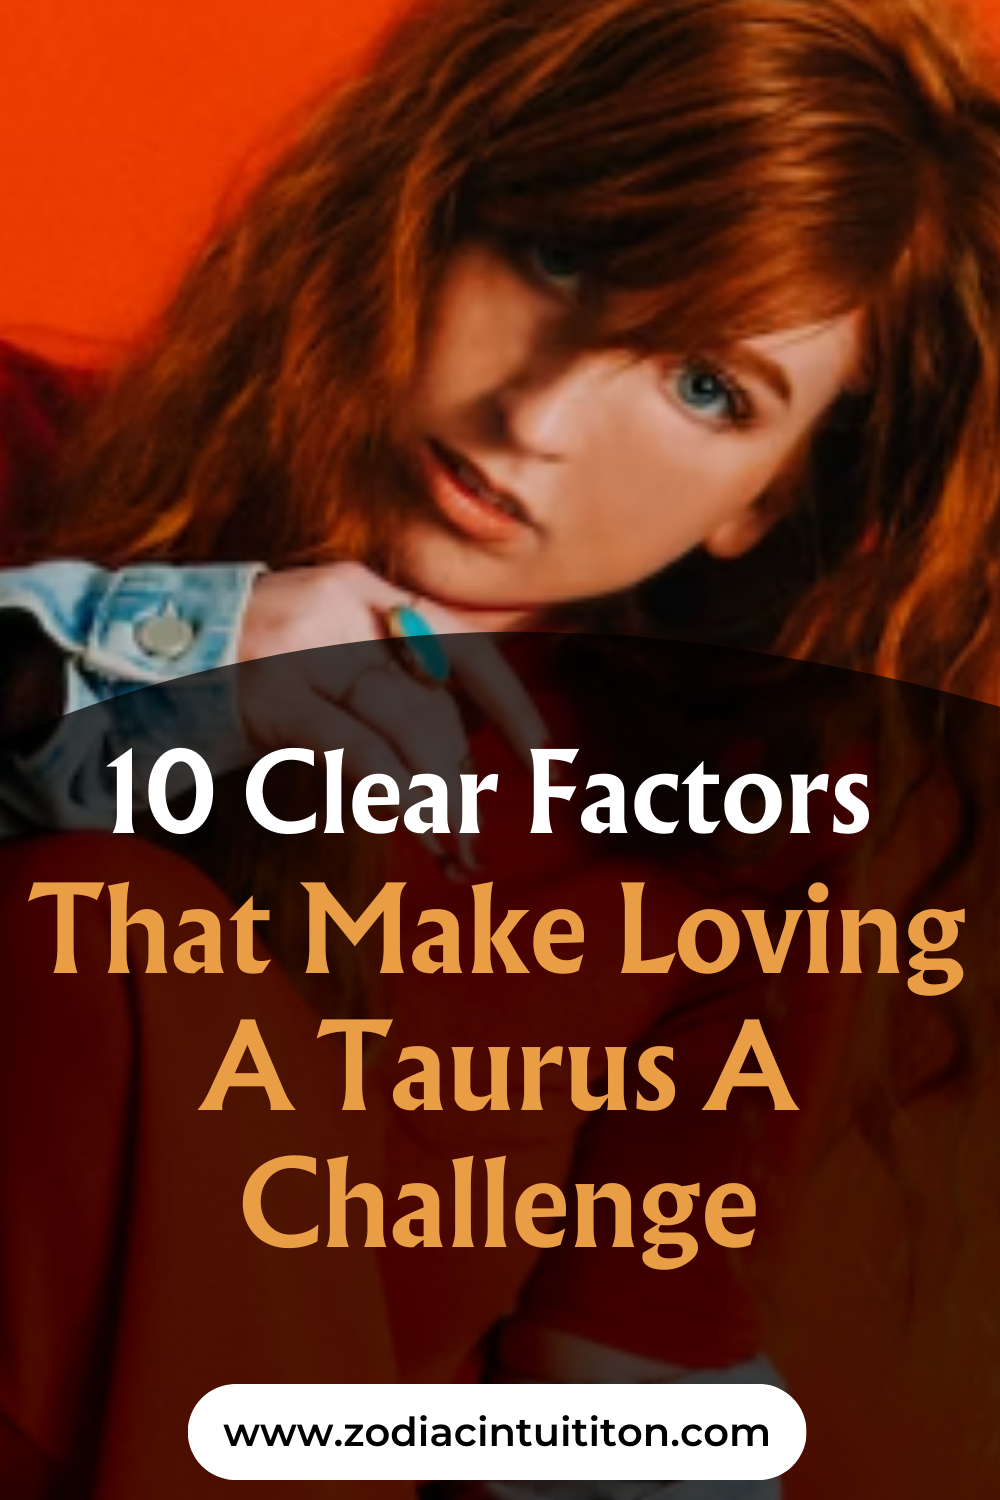 10 Clear Factors That Make Loving A Taurus A Challenge